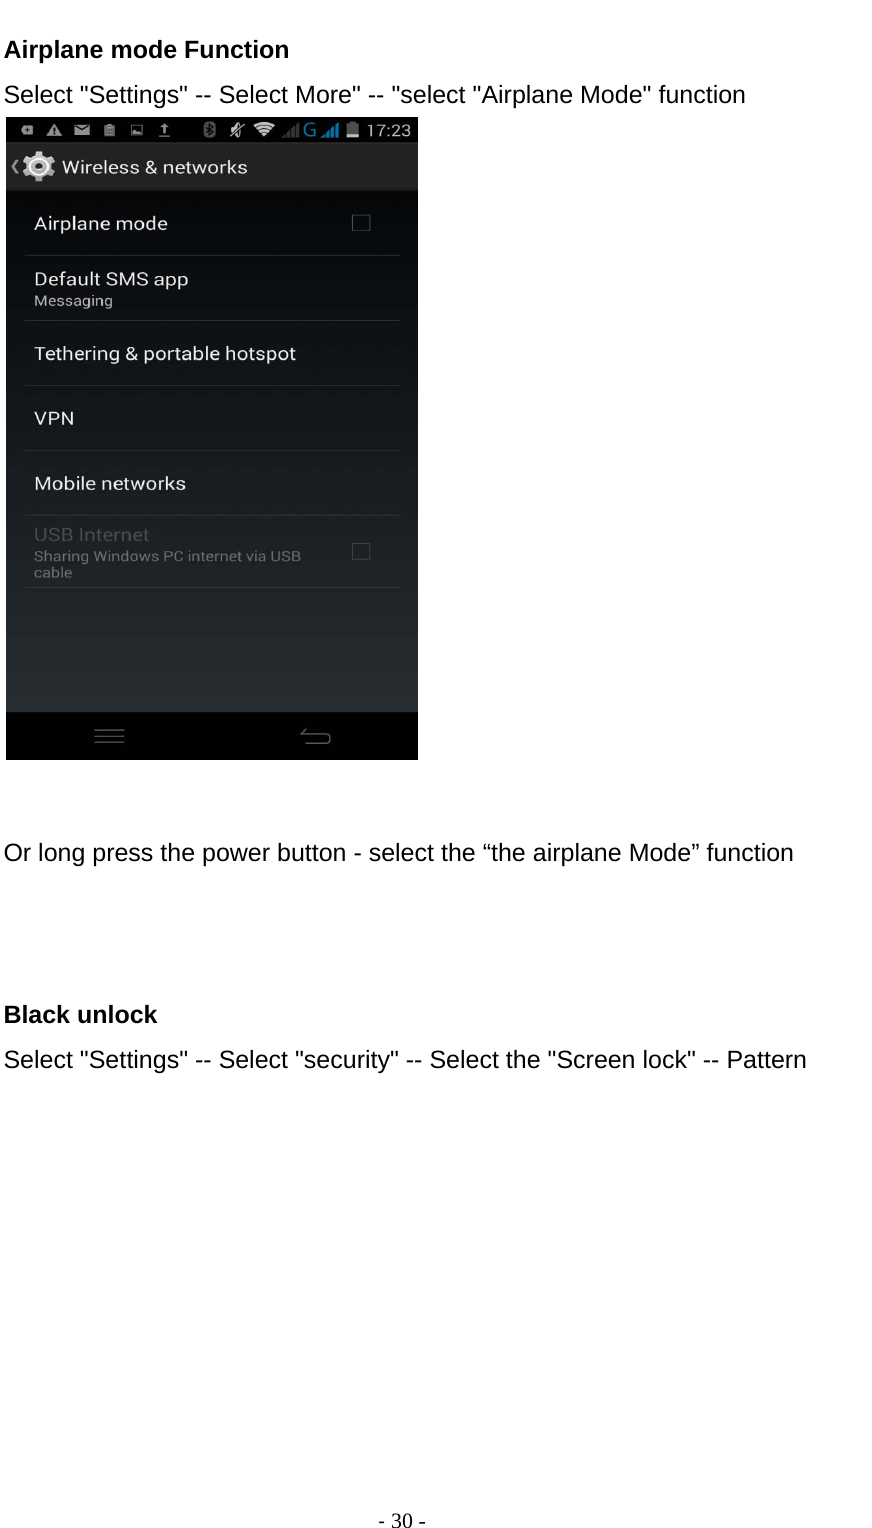                                          ‐ 30 - Airplane mode Function Select &quot;Settings&quot; -- Select More&quot; -- &quot;select &quot;Airplane Mode&quot; function    Or long press the power button - select the “the airplane Mode” function    Black unlock Select &quot;Settings&quot; -- Select &quot;security&quot; -- Select the &quot;Screen lock&quot; -- Pattern 